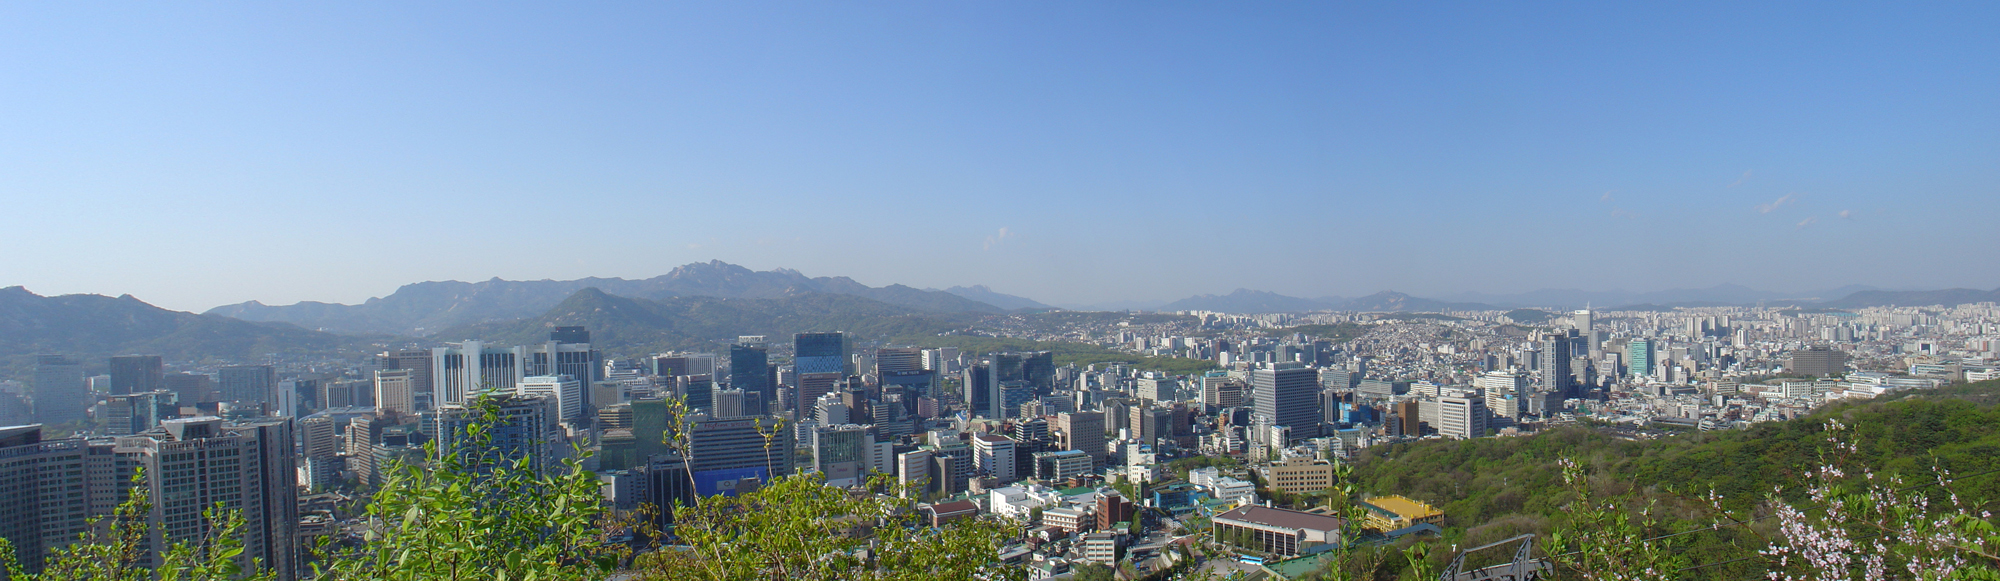 The skyline of Seoul with the hills in the background.